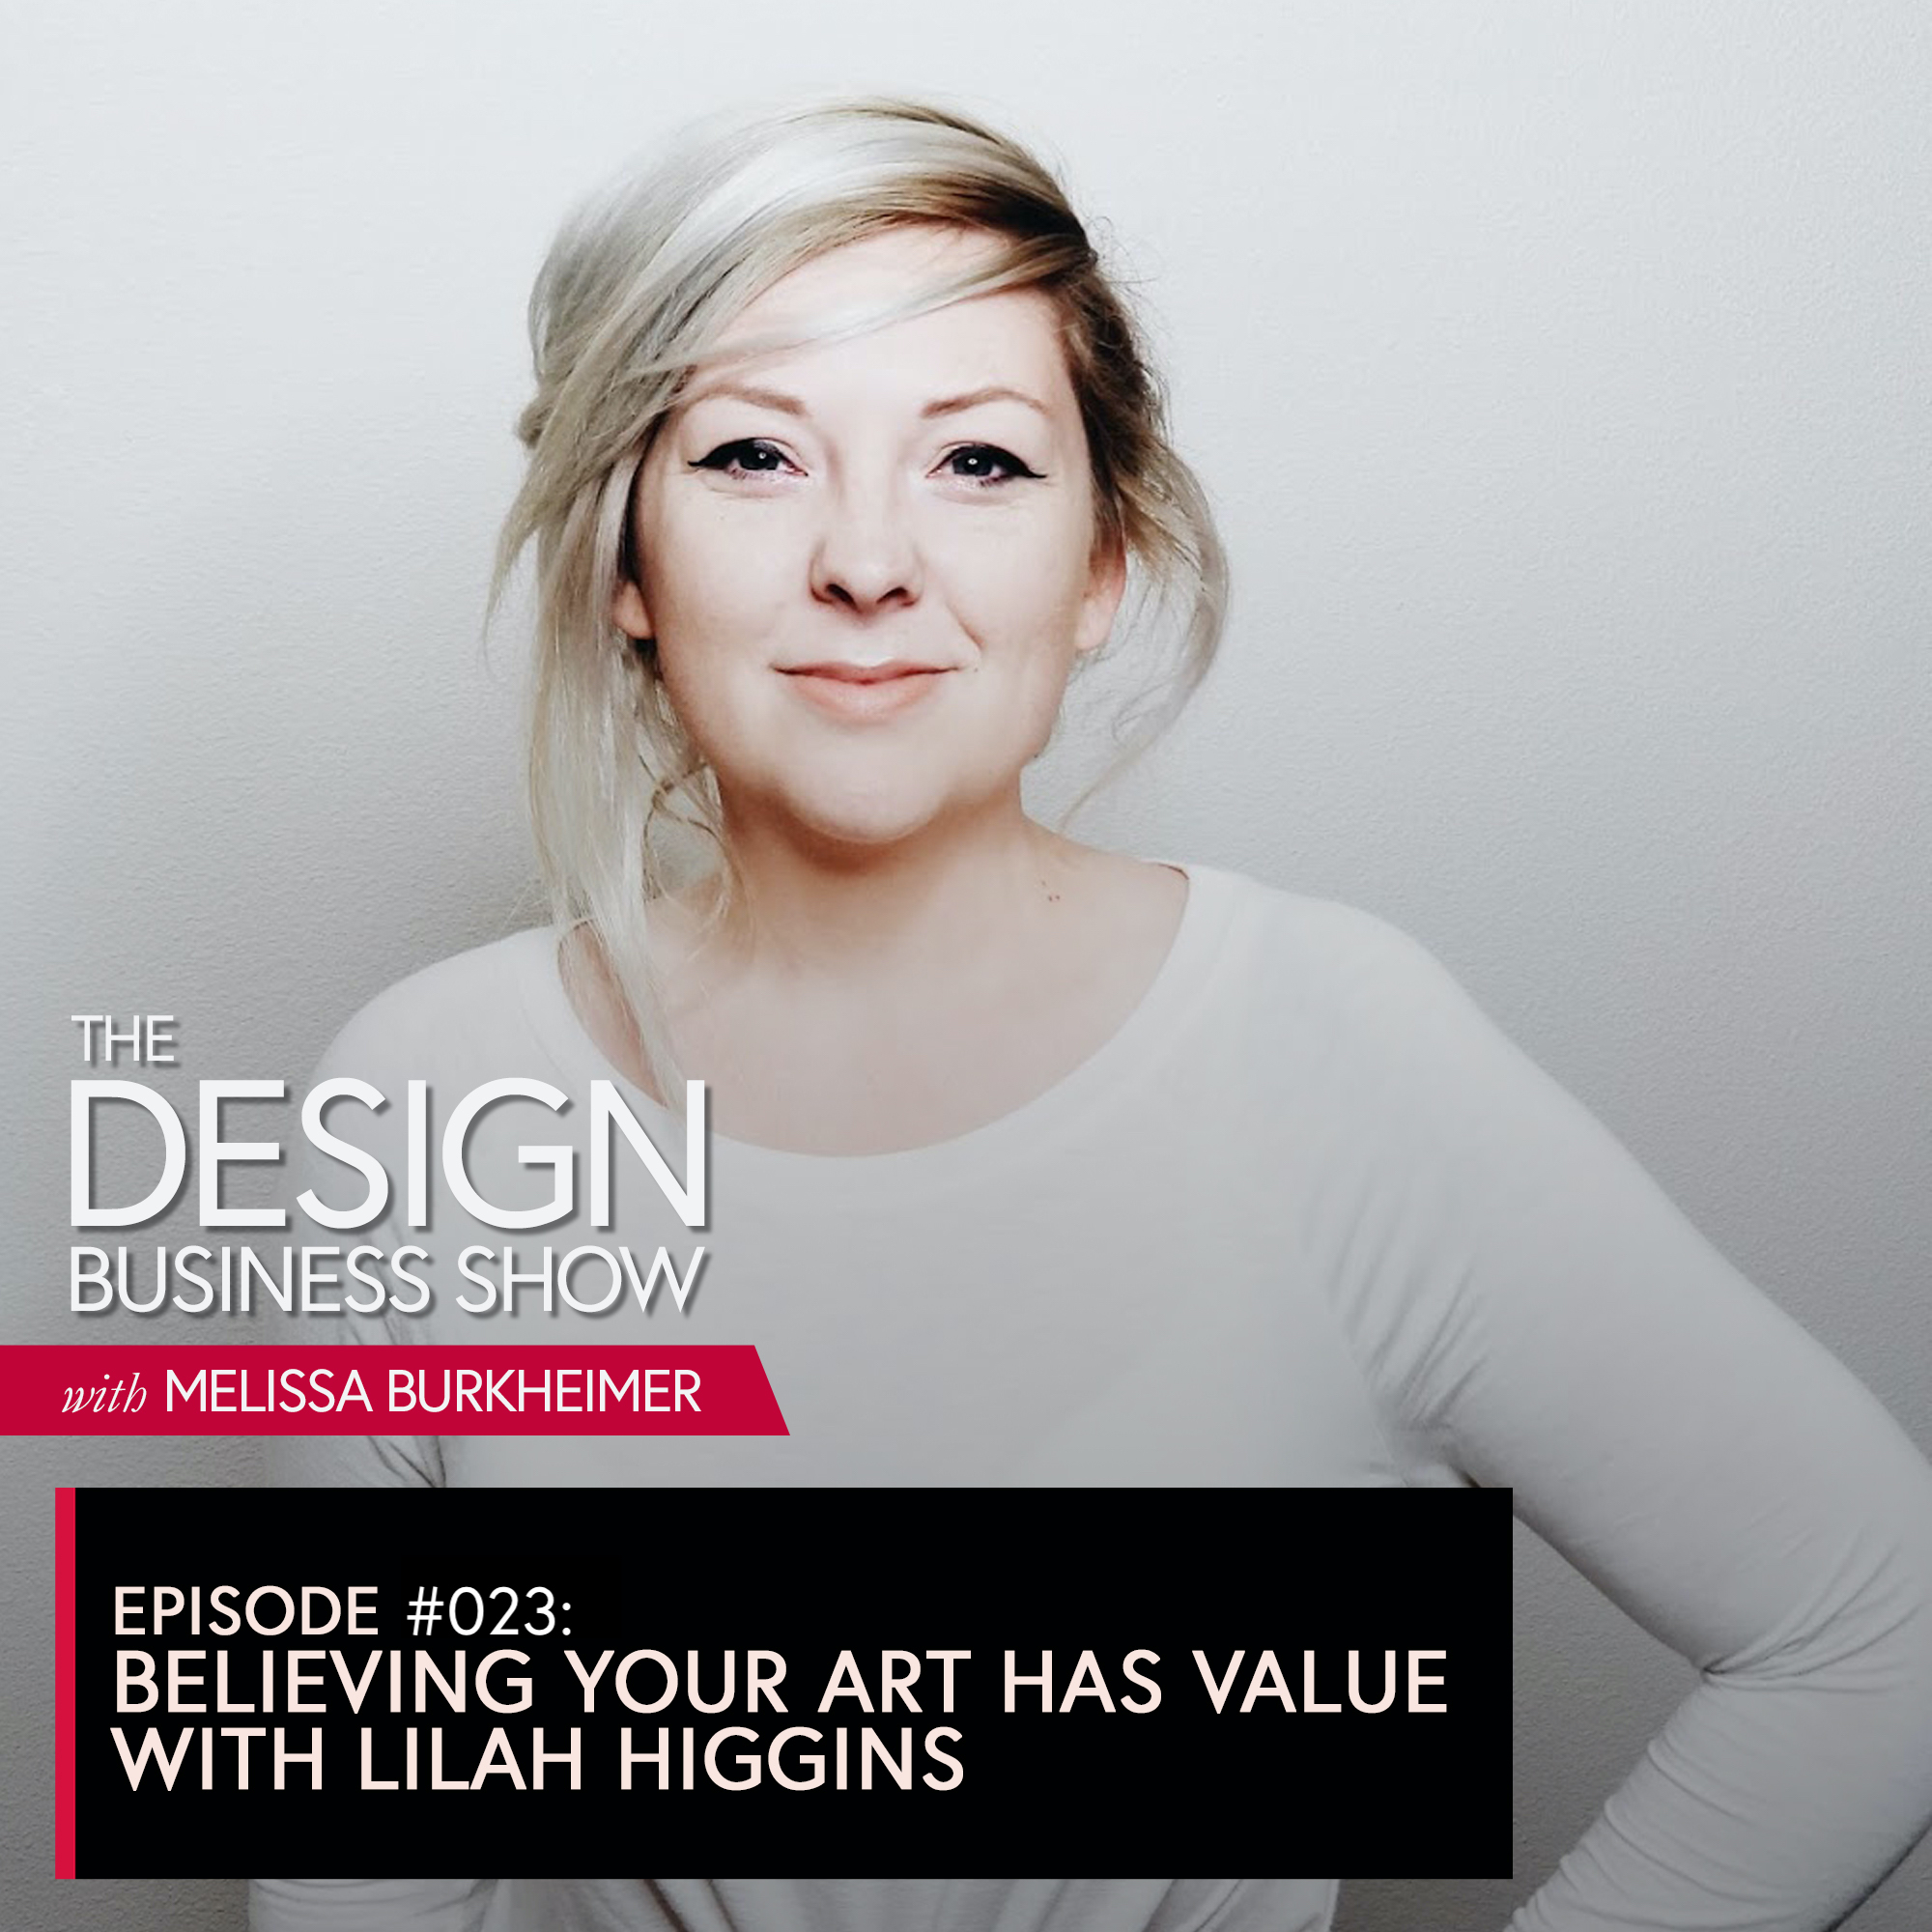 Join me for episode 23 of The Design Business Show with Lilah Higgins, creative genius over at The Higgins Creative about believing your art has value, tapping into your own strengths in your offers, and why strategy matters.